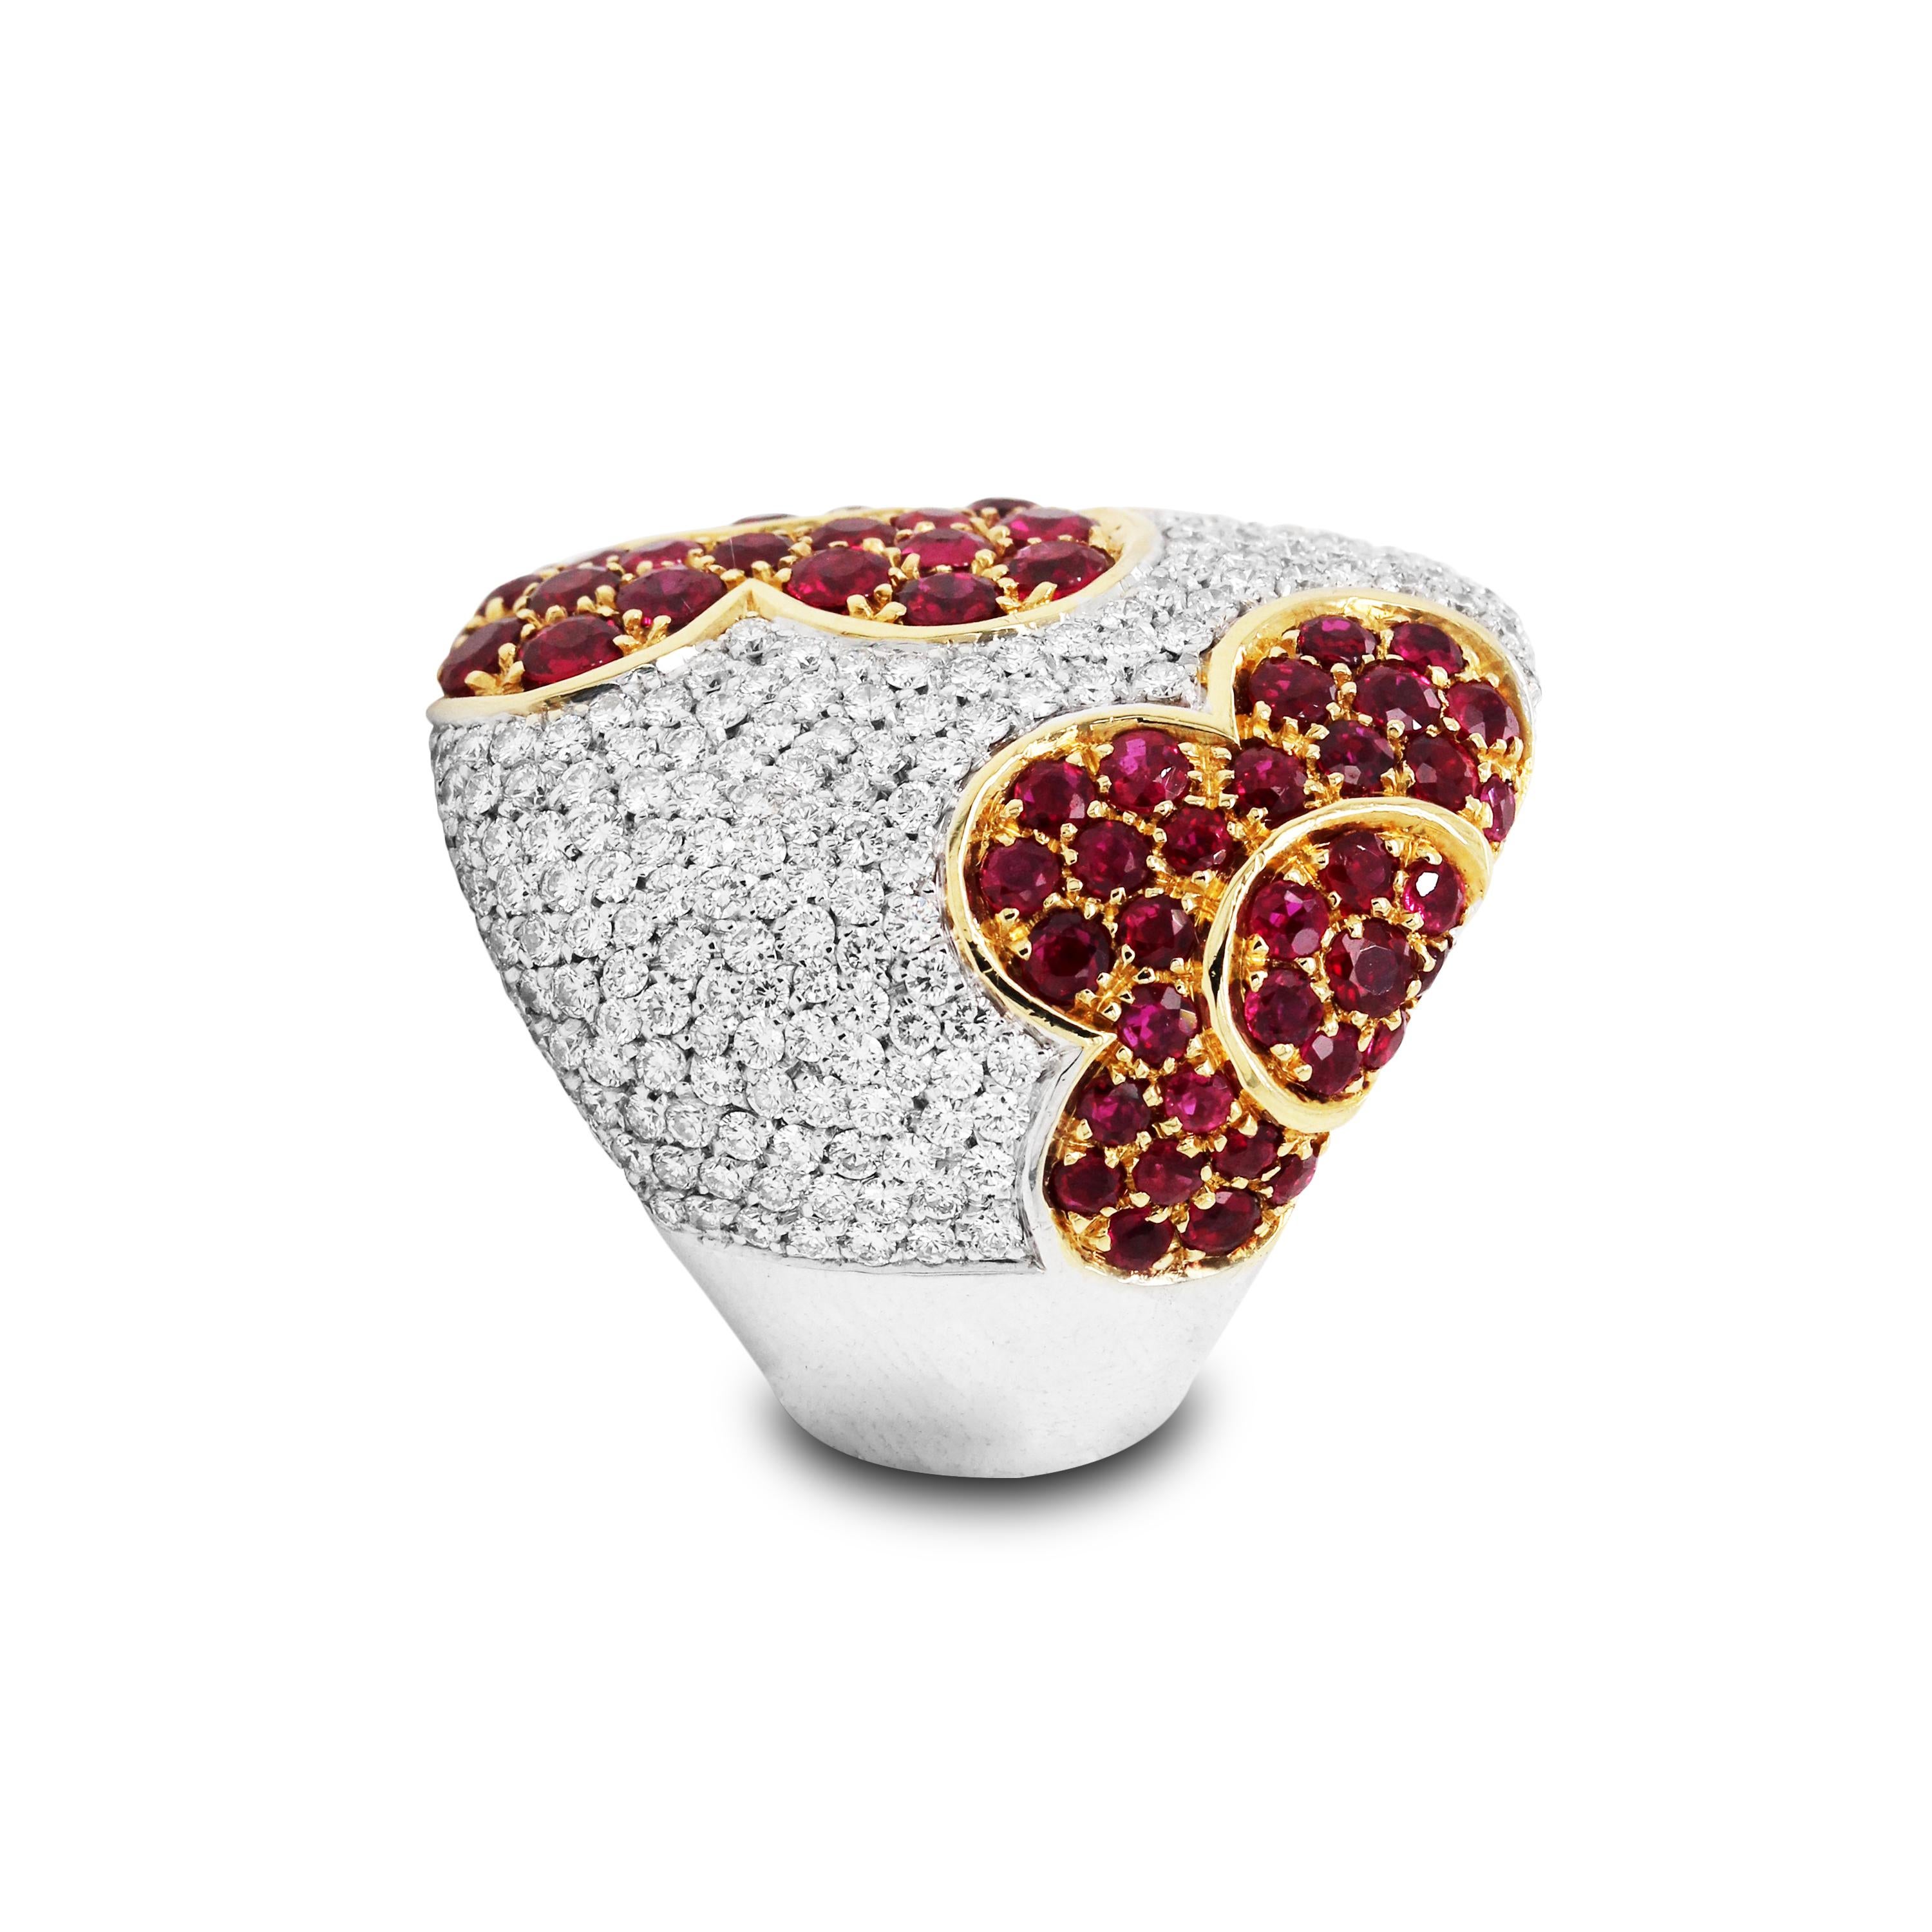 Gregorio Signed Ruby Diamond 18K White Yellow Gold Floral Flower Wide Dome Ring

Rubys are all set in yellow gold and diamonds are set in white gold

5.94 carat apprx. Ruby total weight
1.76 carat G color, VS clarity diamonds total weight

Ring face